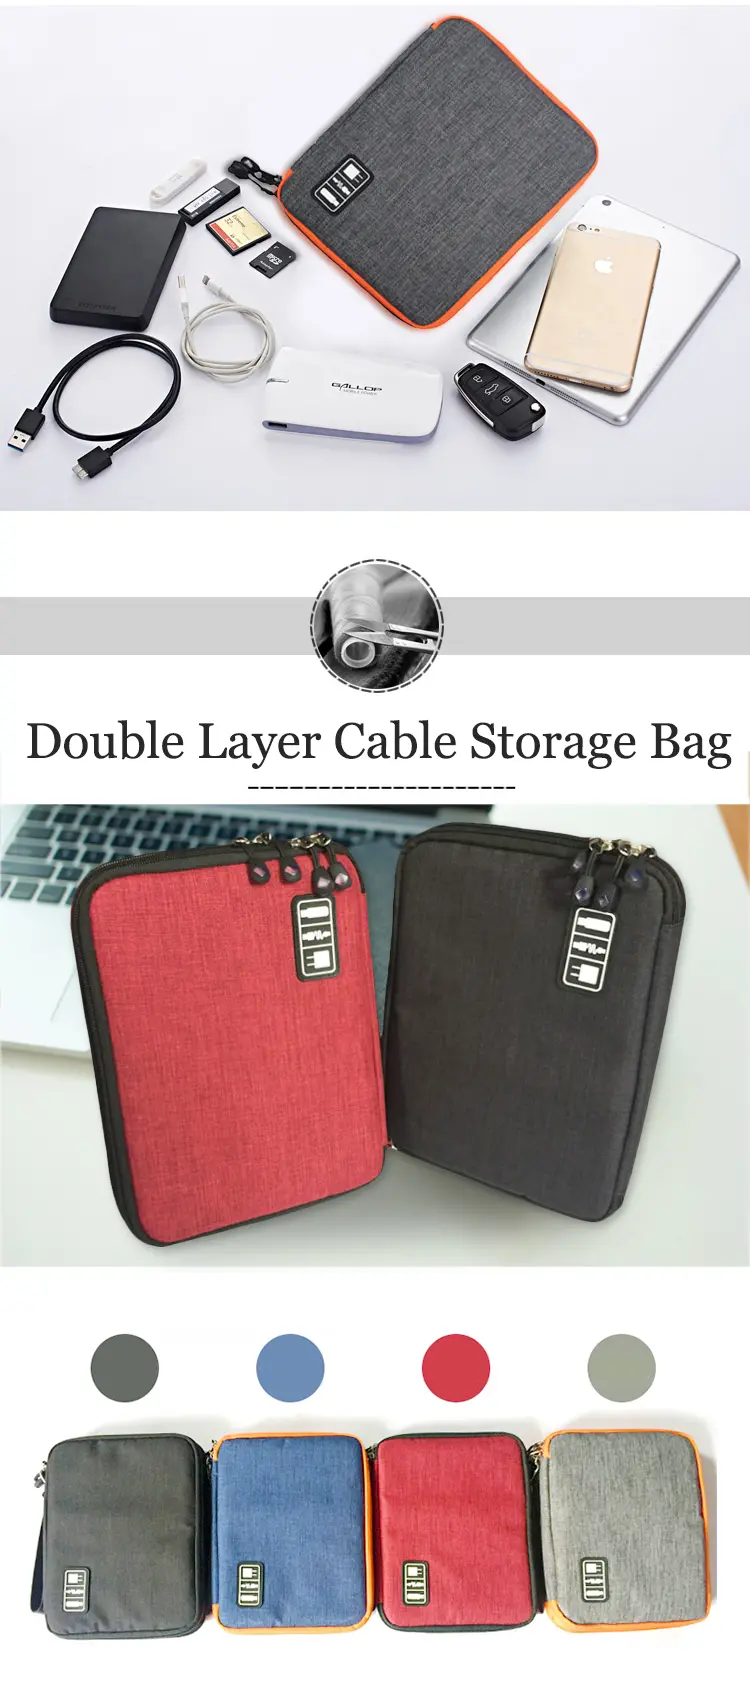 Honana HN-CB1 Double Layer Cable Storage Bag Electronic Accessories Organizer Travel Gear